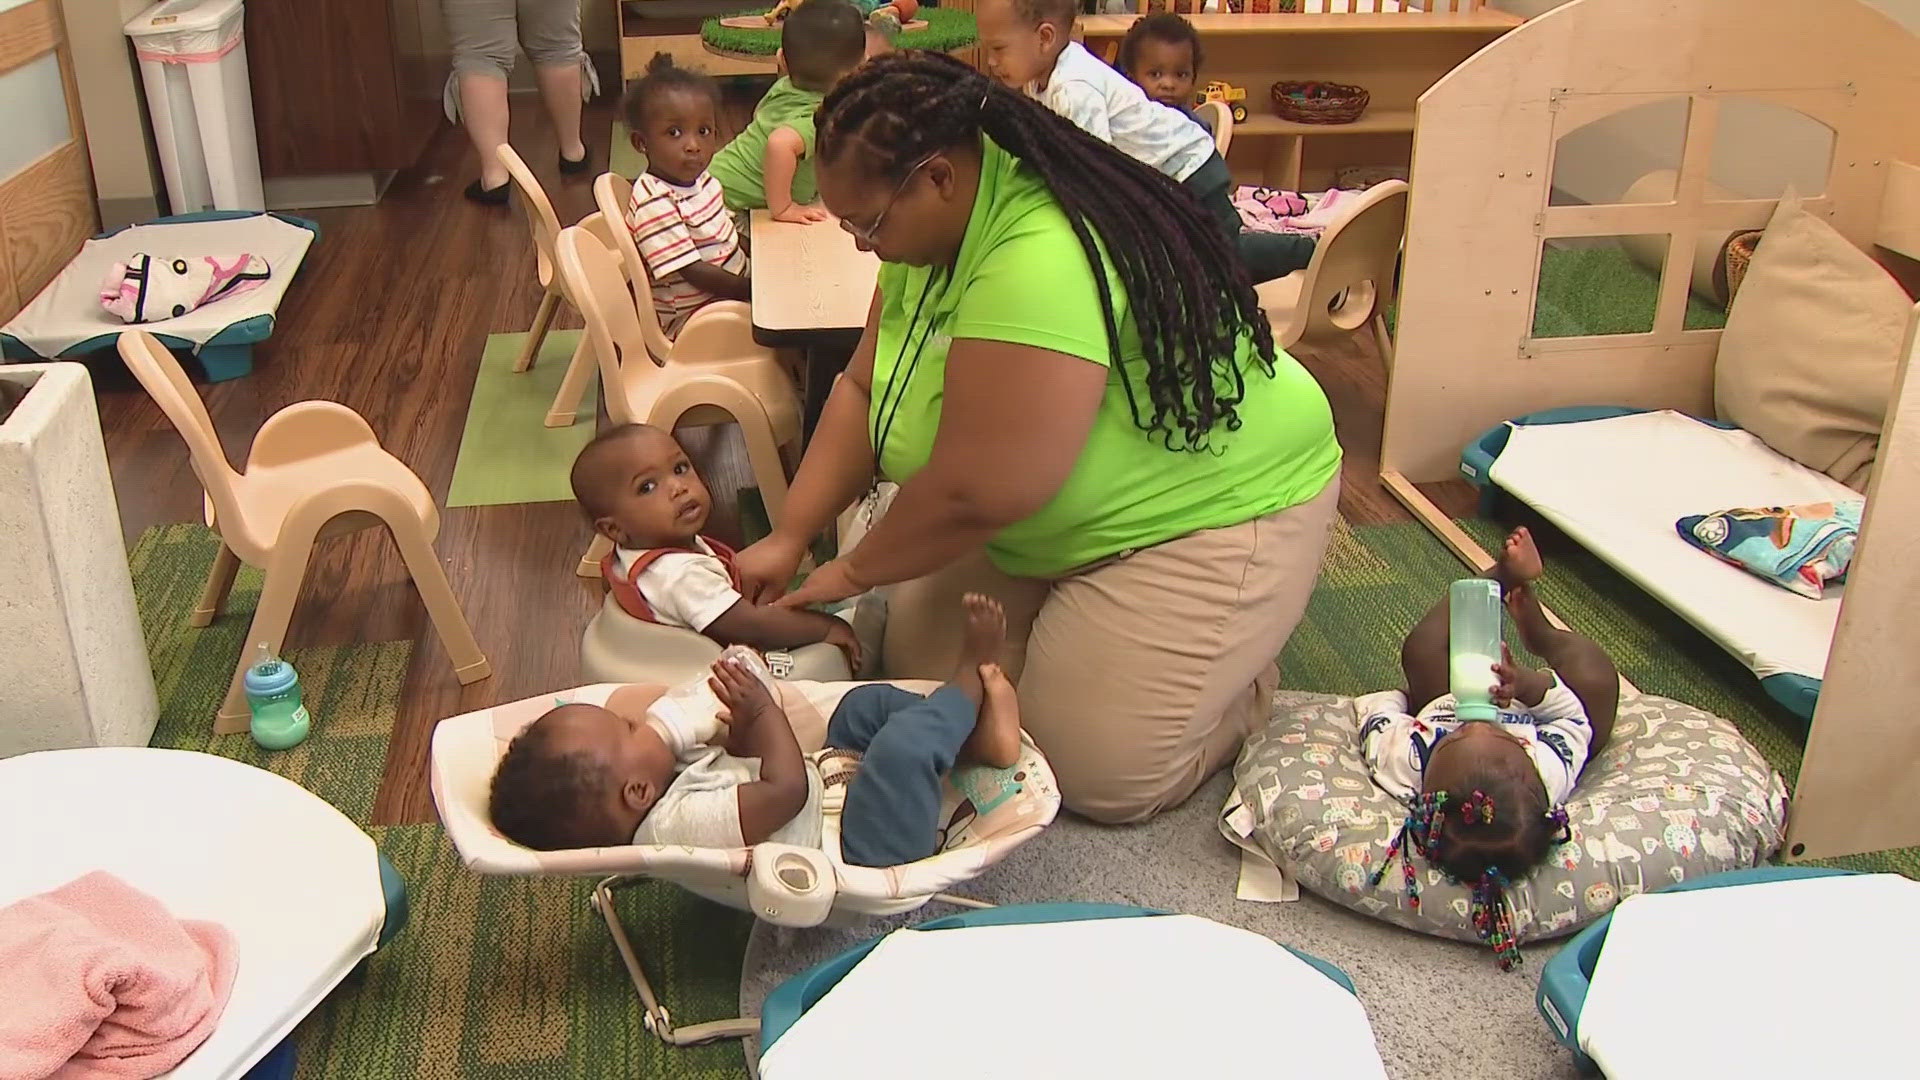 The bills aim to make child care more affordable and accessible by using a cost-sharing model.